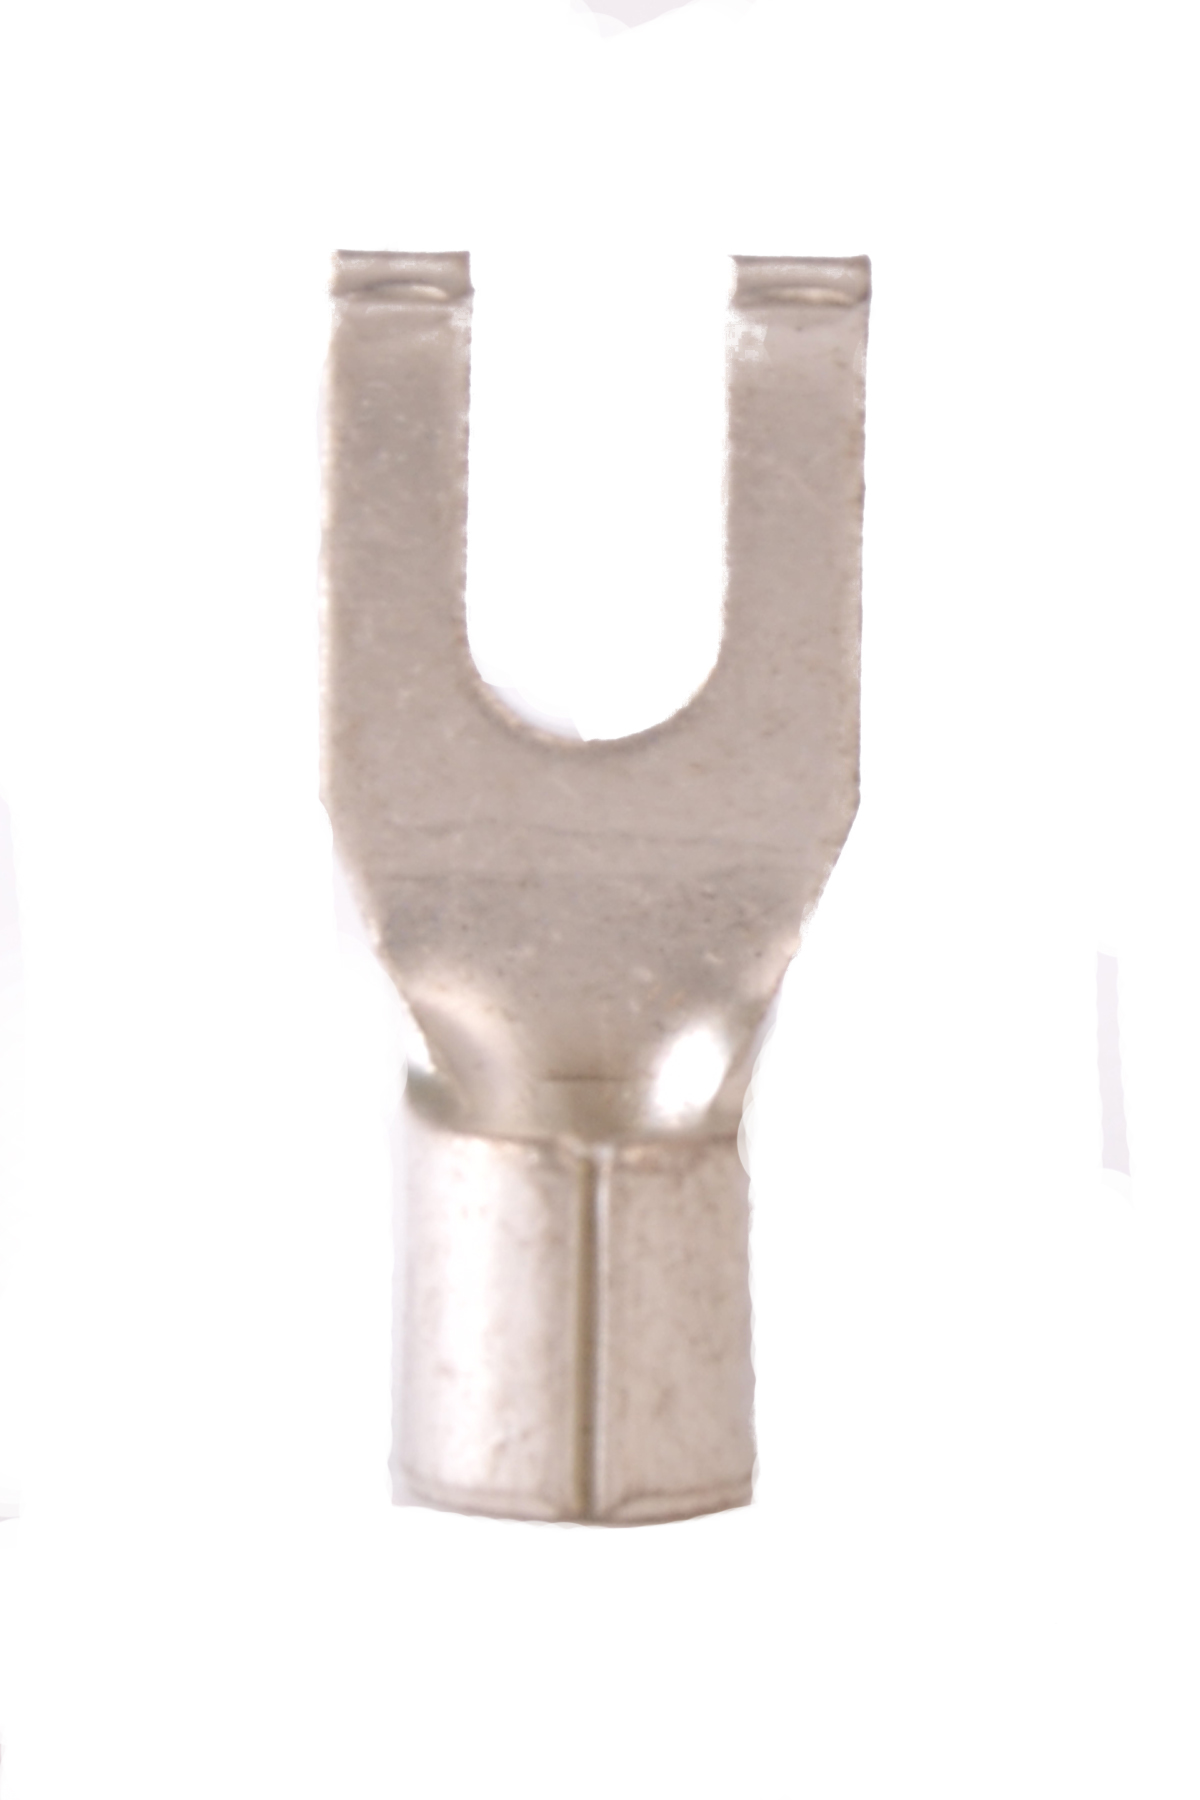 12-10 Non Insulated #6 Flanged Spade